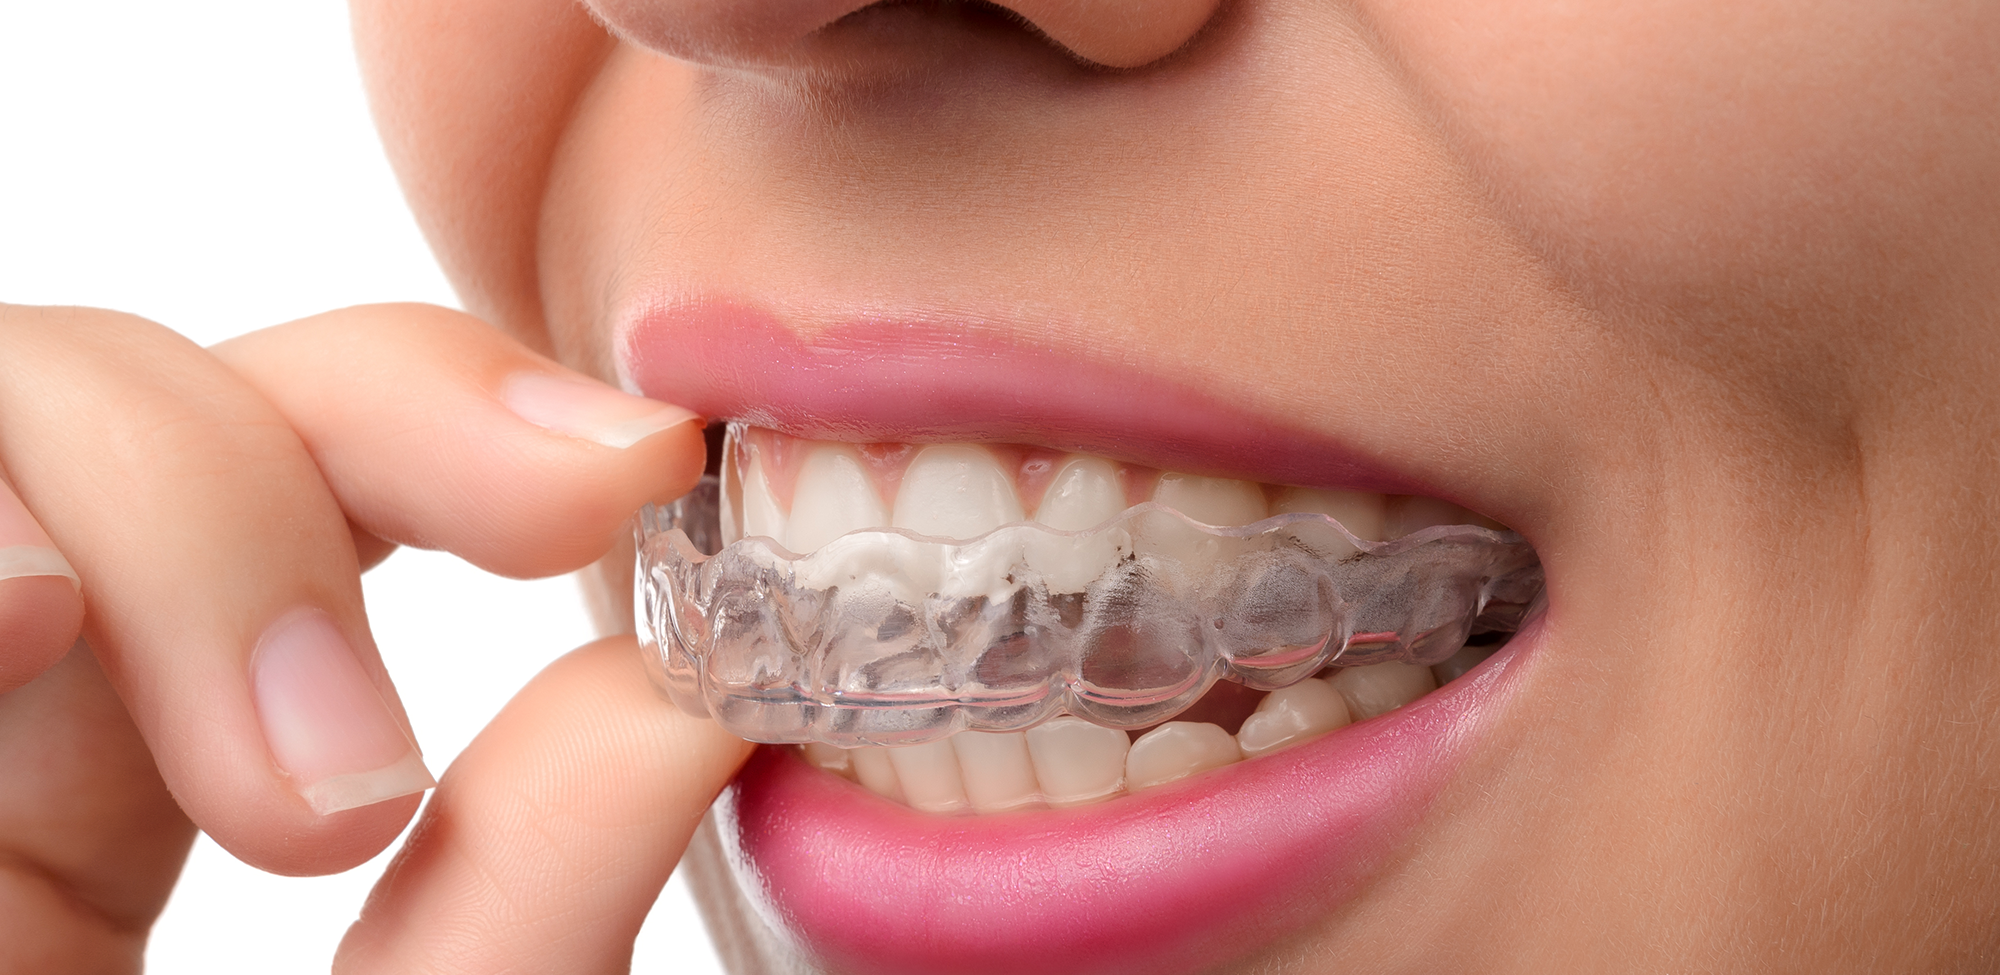 A mouth showcasing the Invisalign retainers